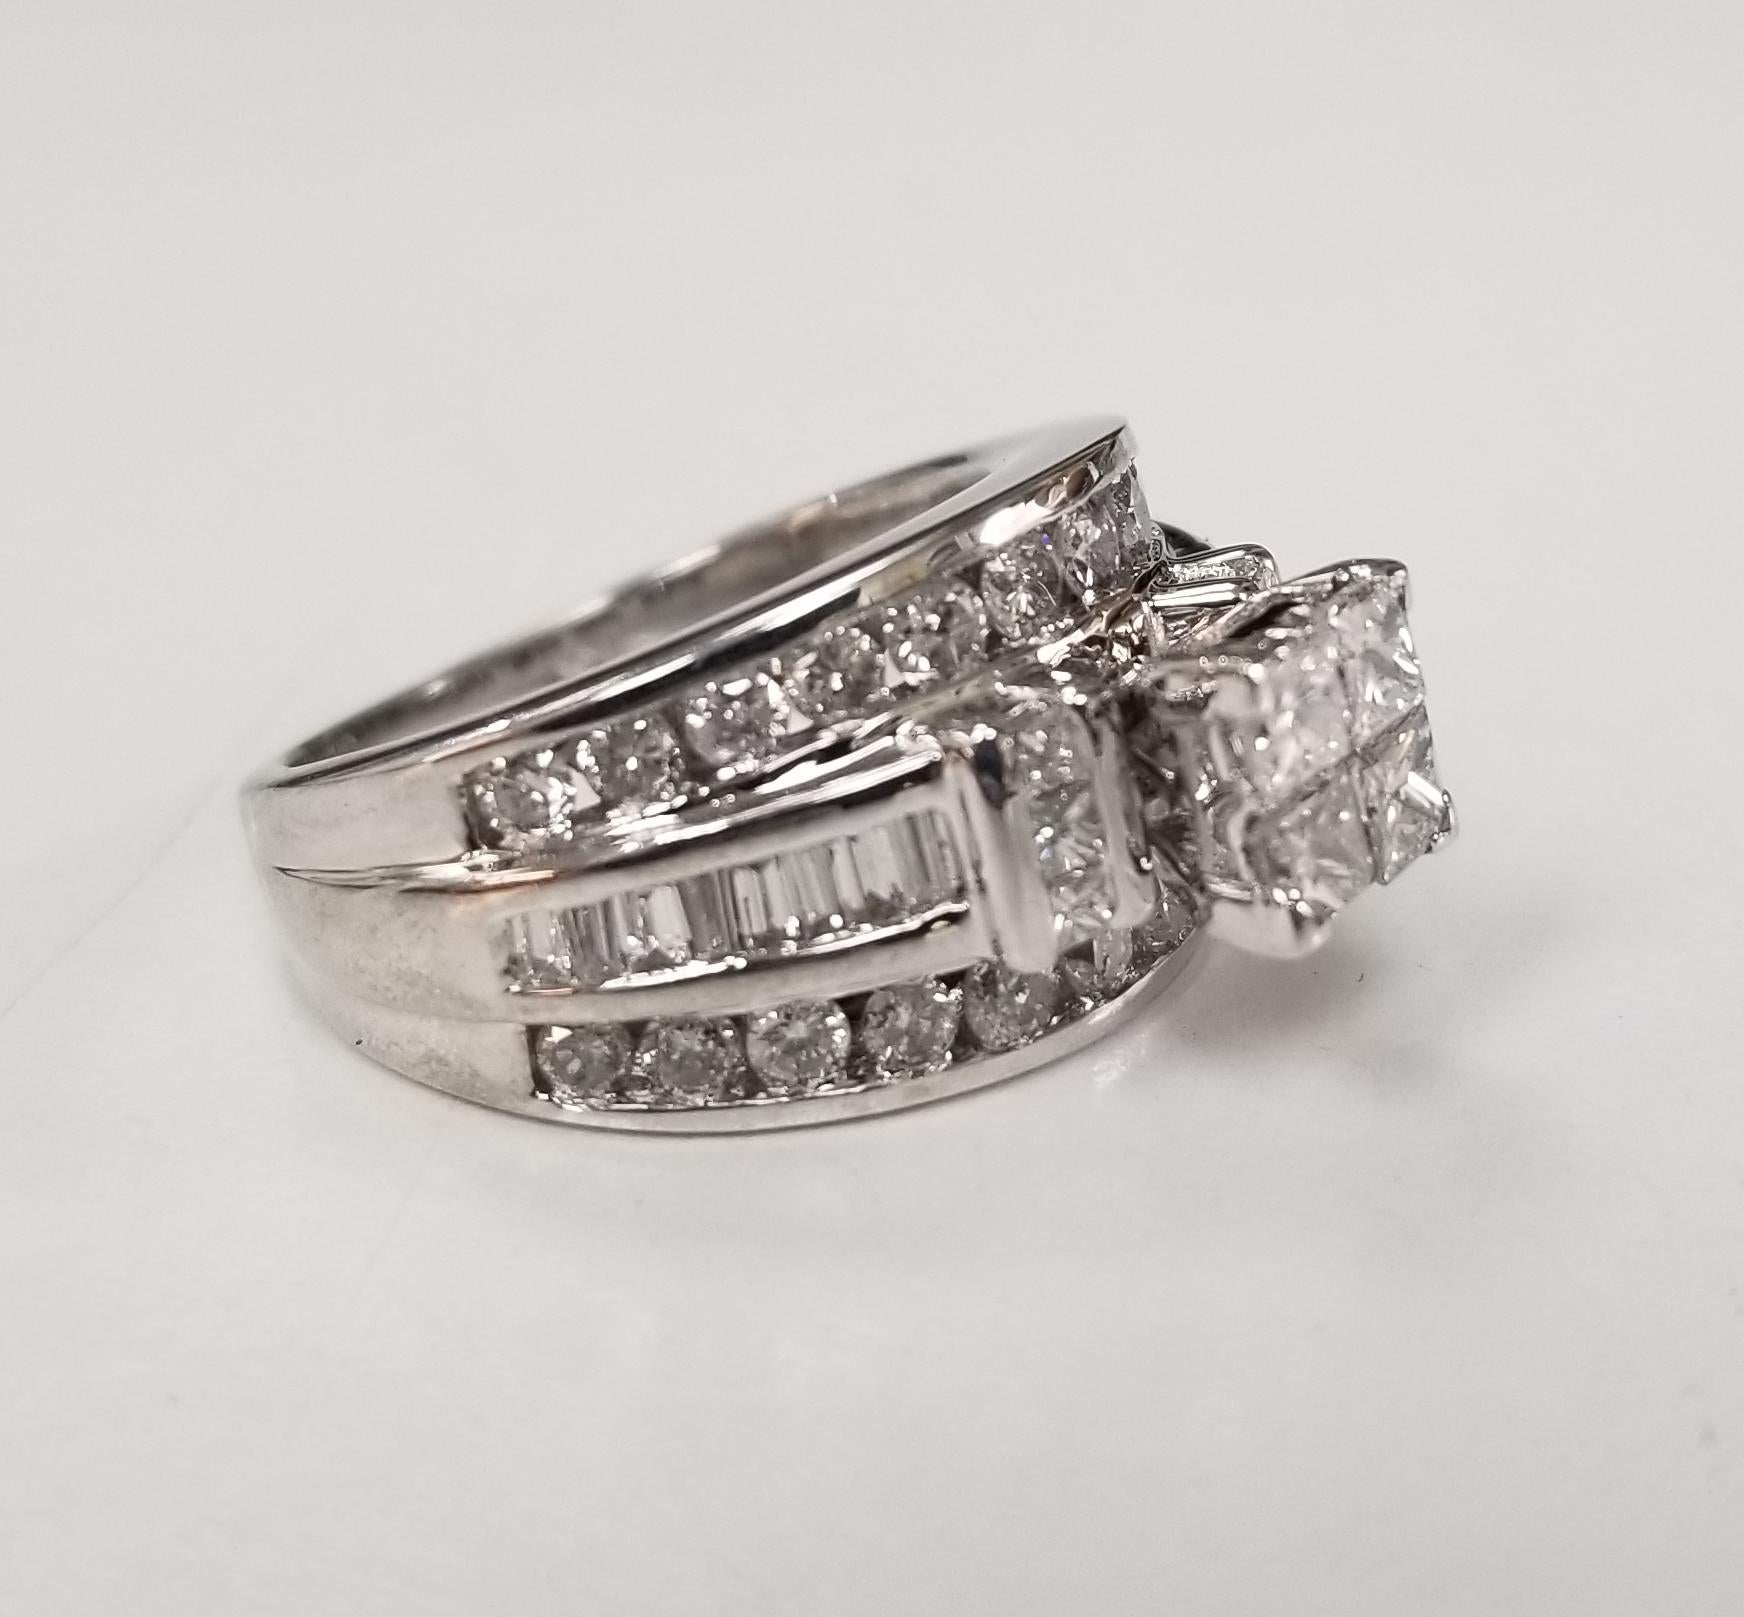 14k white gold invisible set diamond ring w/ princess, round and baguette cut diamonds, containing 50 diamonds weighing 1.20cts. diamond color 